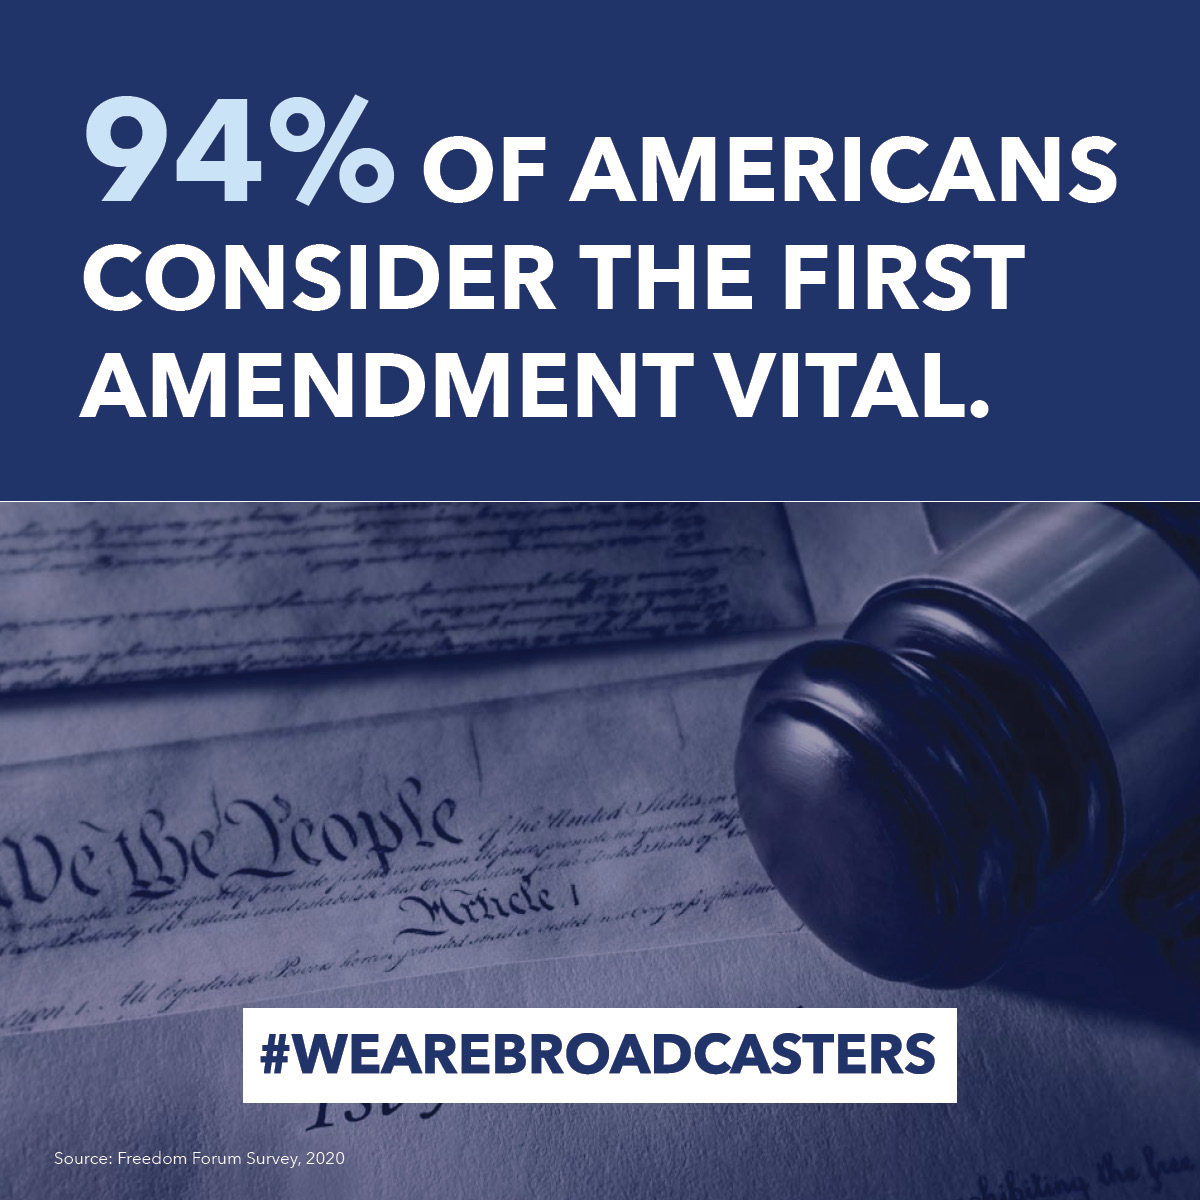 94% of Americans consider the first amendment vital